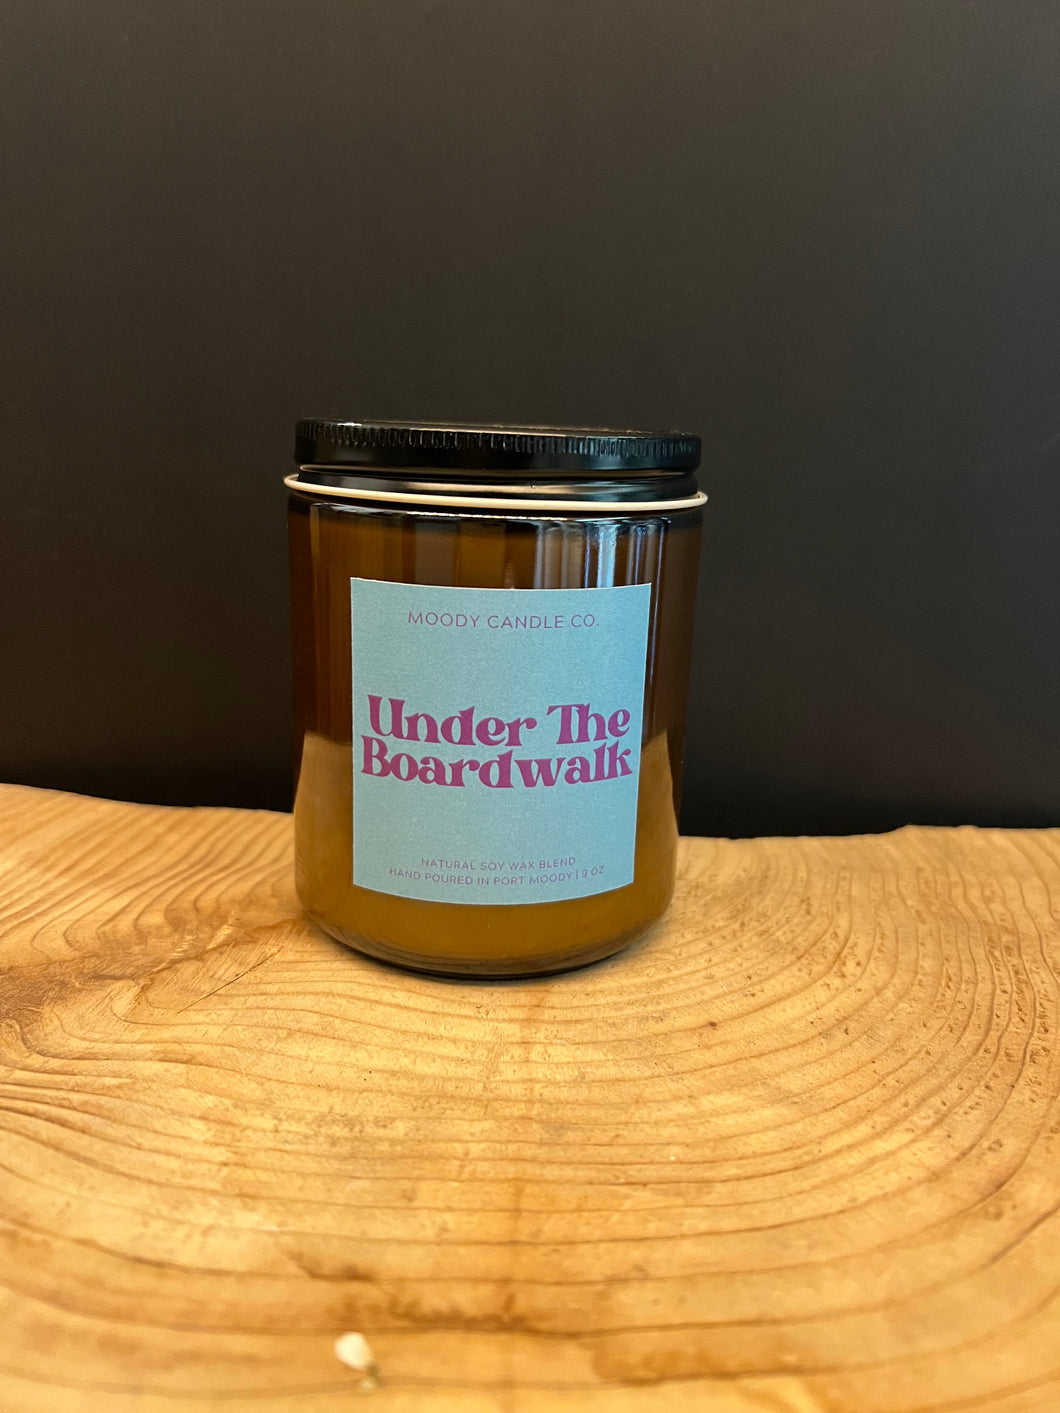 Moody Candle Co. - Under The Boardwalk